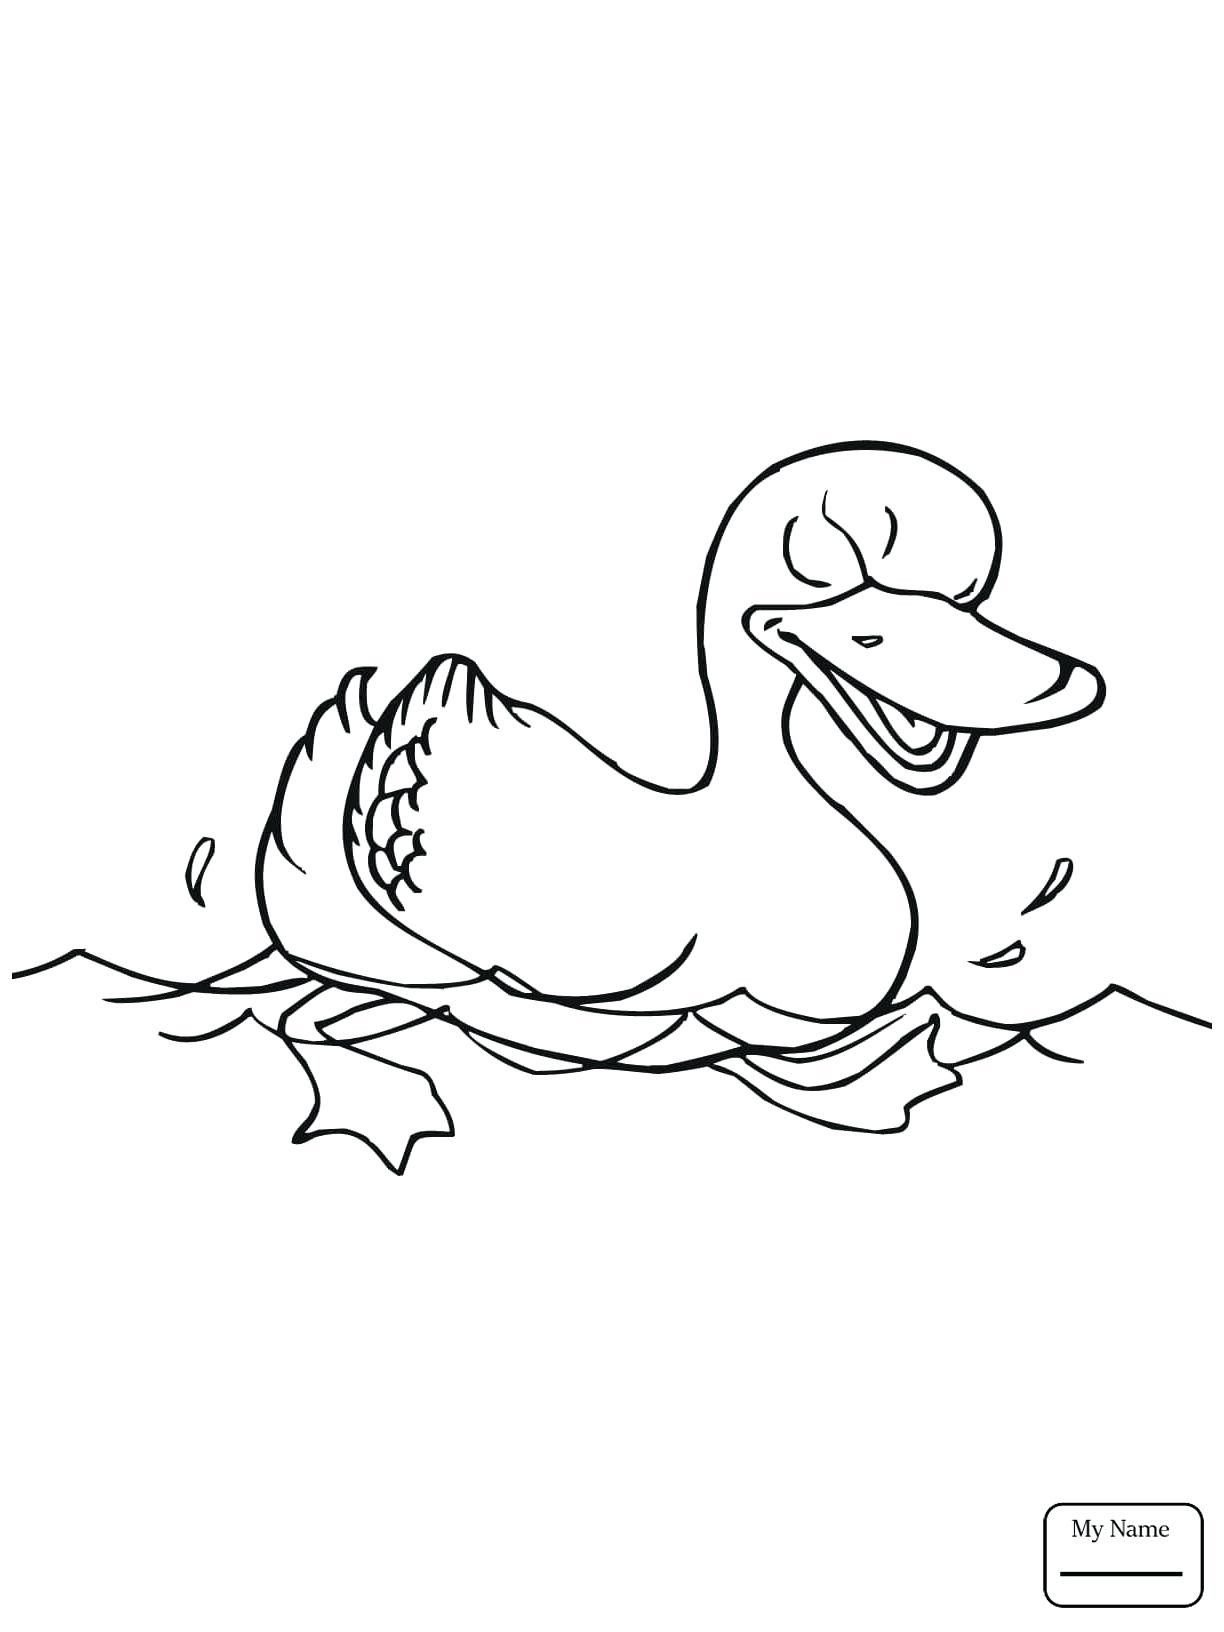 Pond Animals Coloring Pages